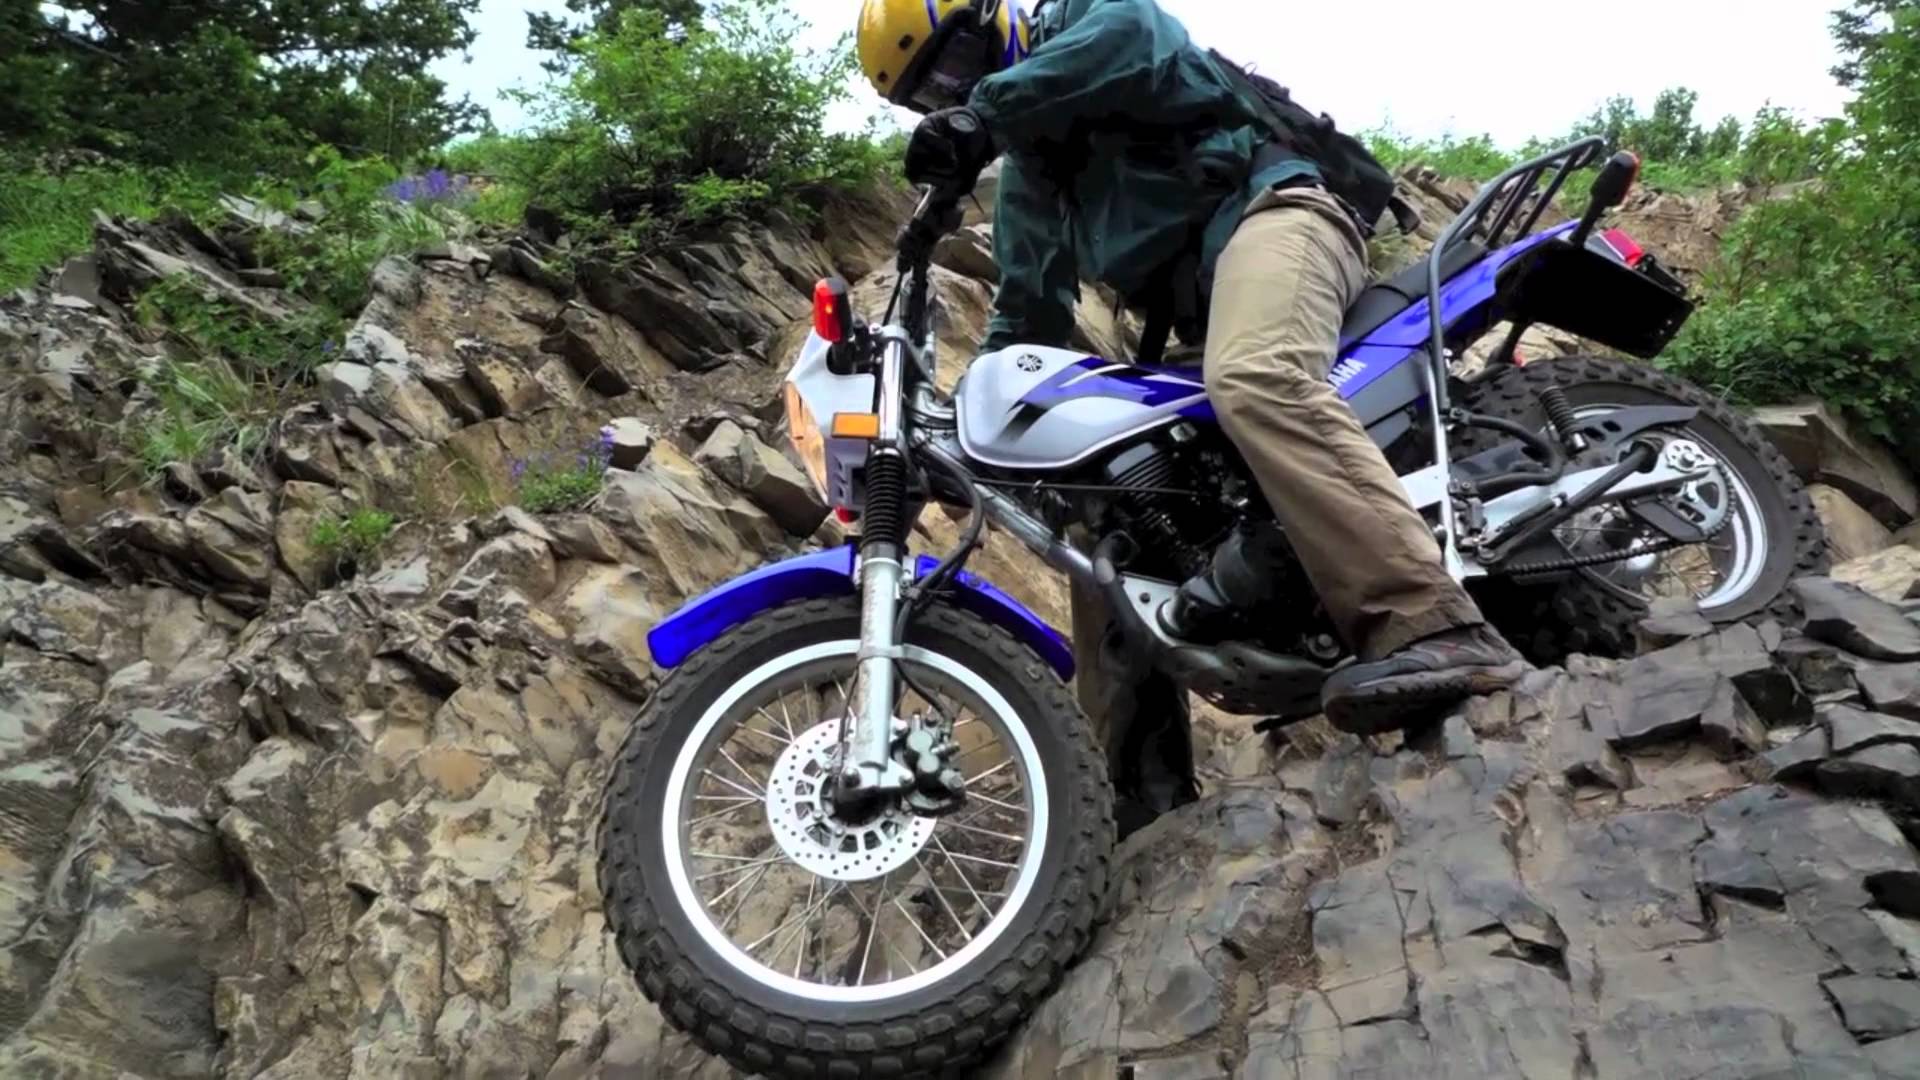 See Why The Yamaha Tw200 Is Considered One Of Best Adventure